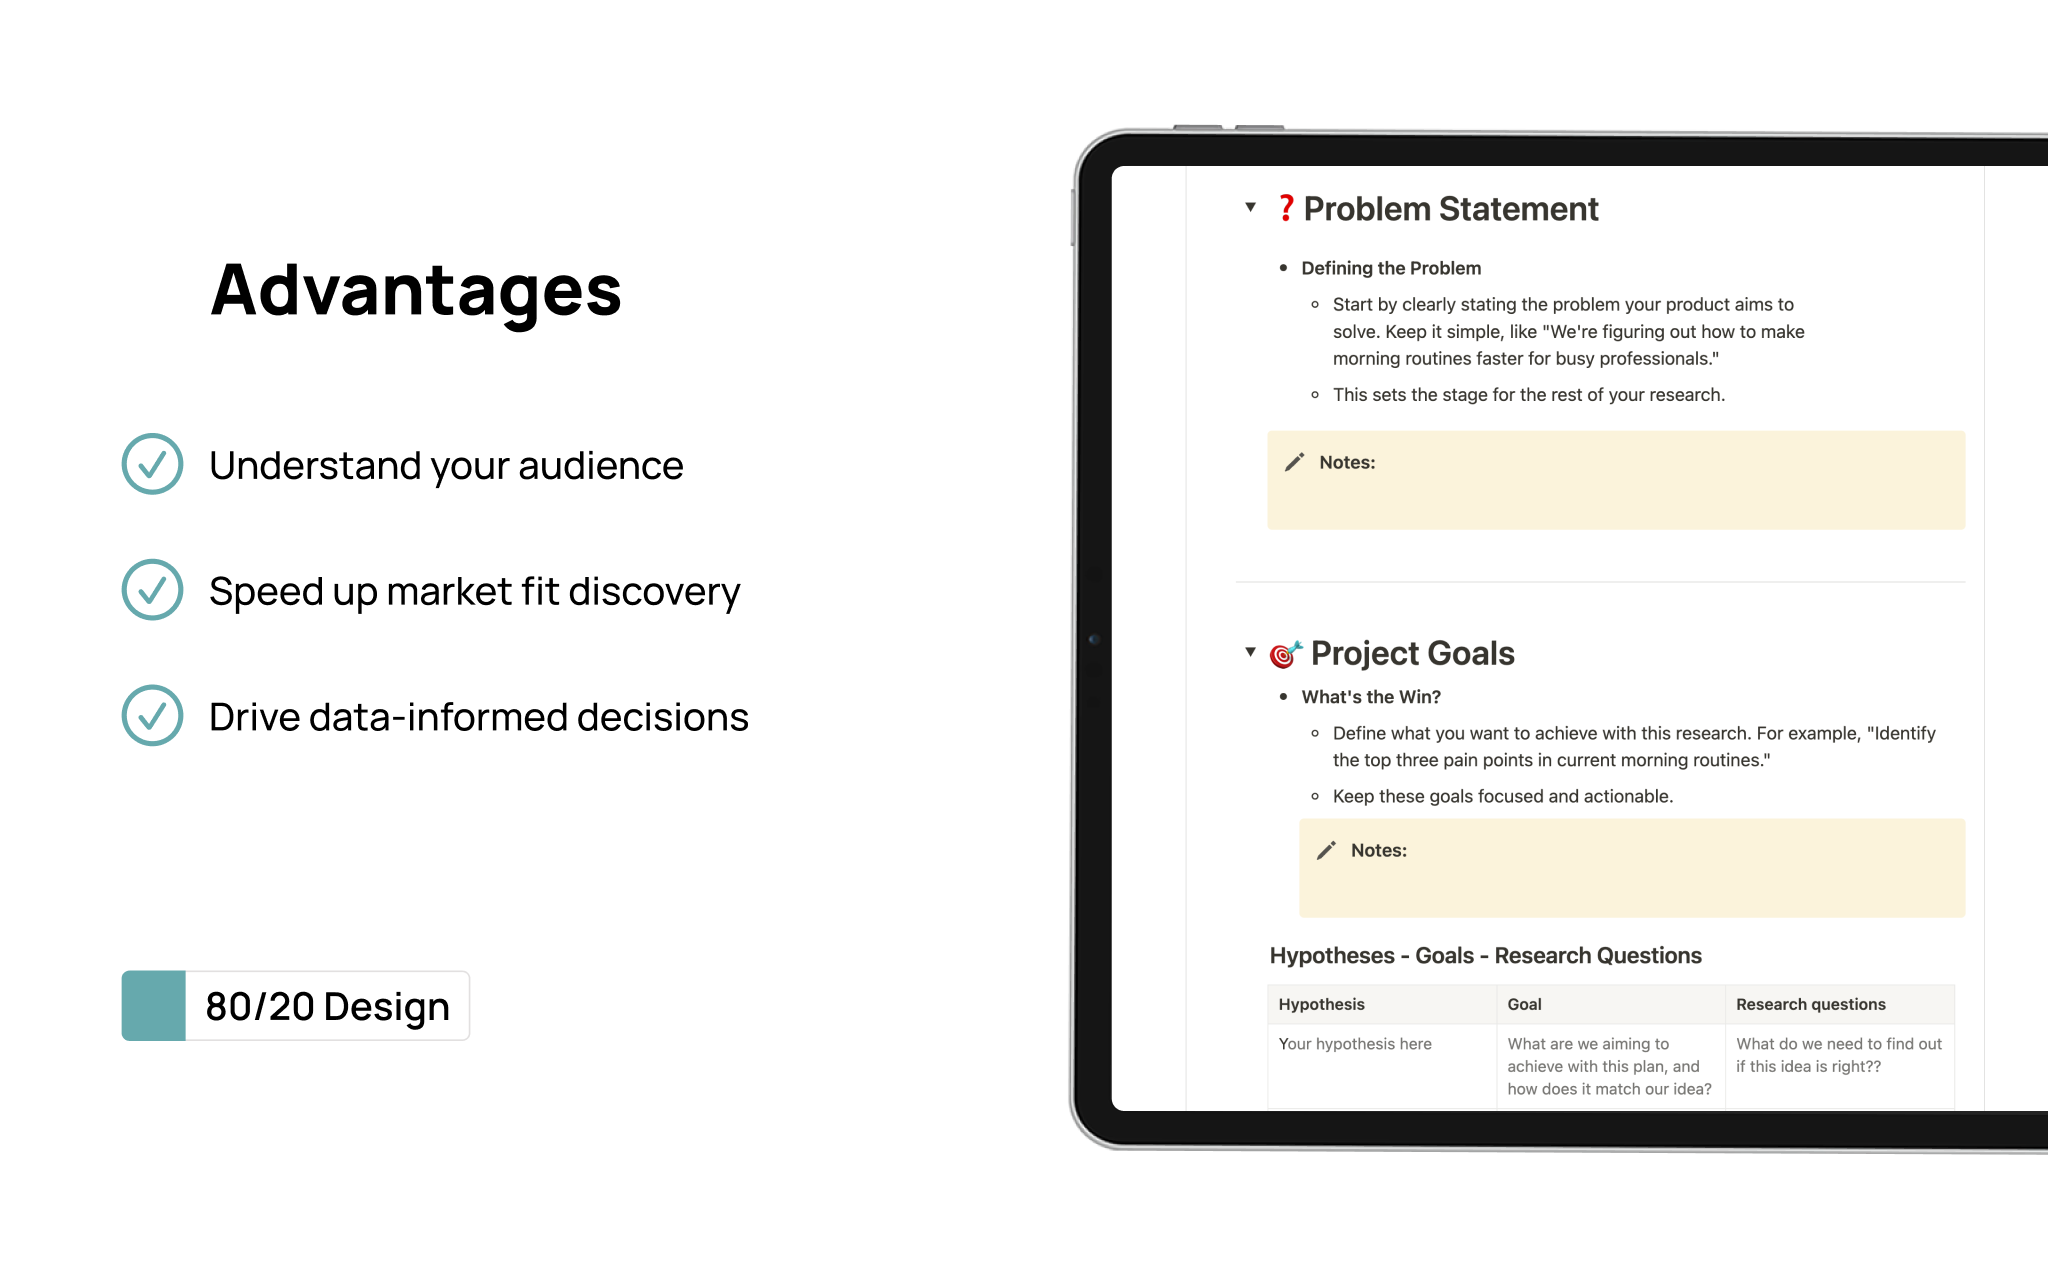 Kickstart user research with “🚦 User Research Kick-off” from 80/20 Design. Perfect for solopreneurs & startups, this Notion template guides your insight discovery 🌱.
Explore more tools at www.8020d.com.